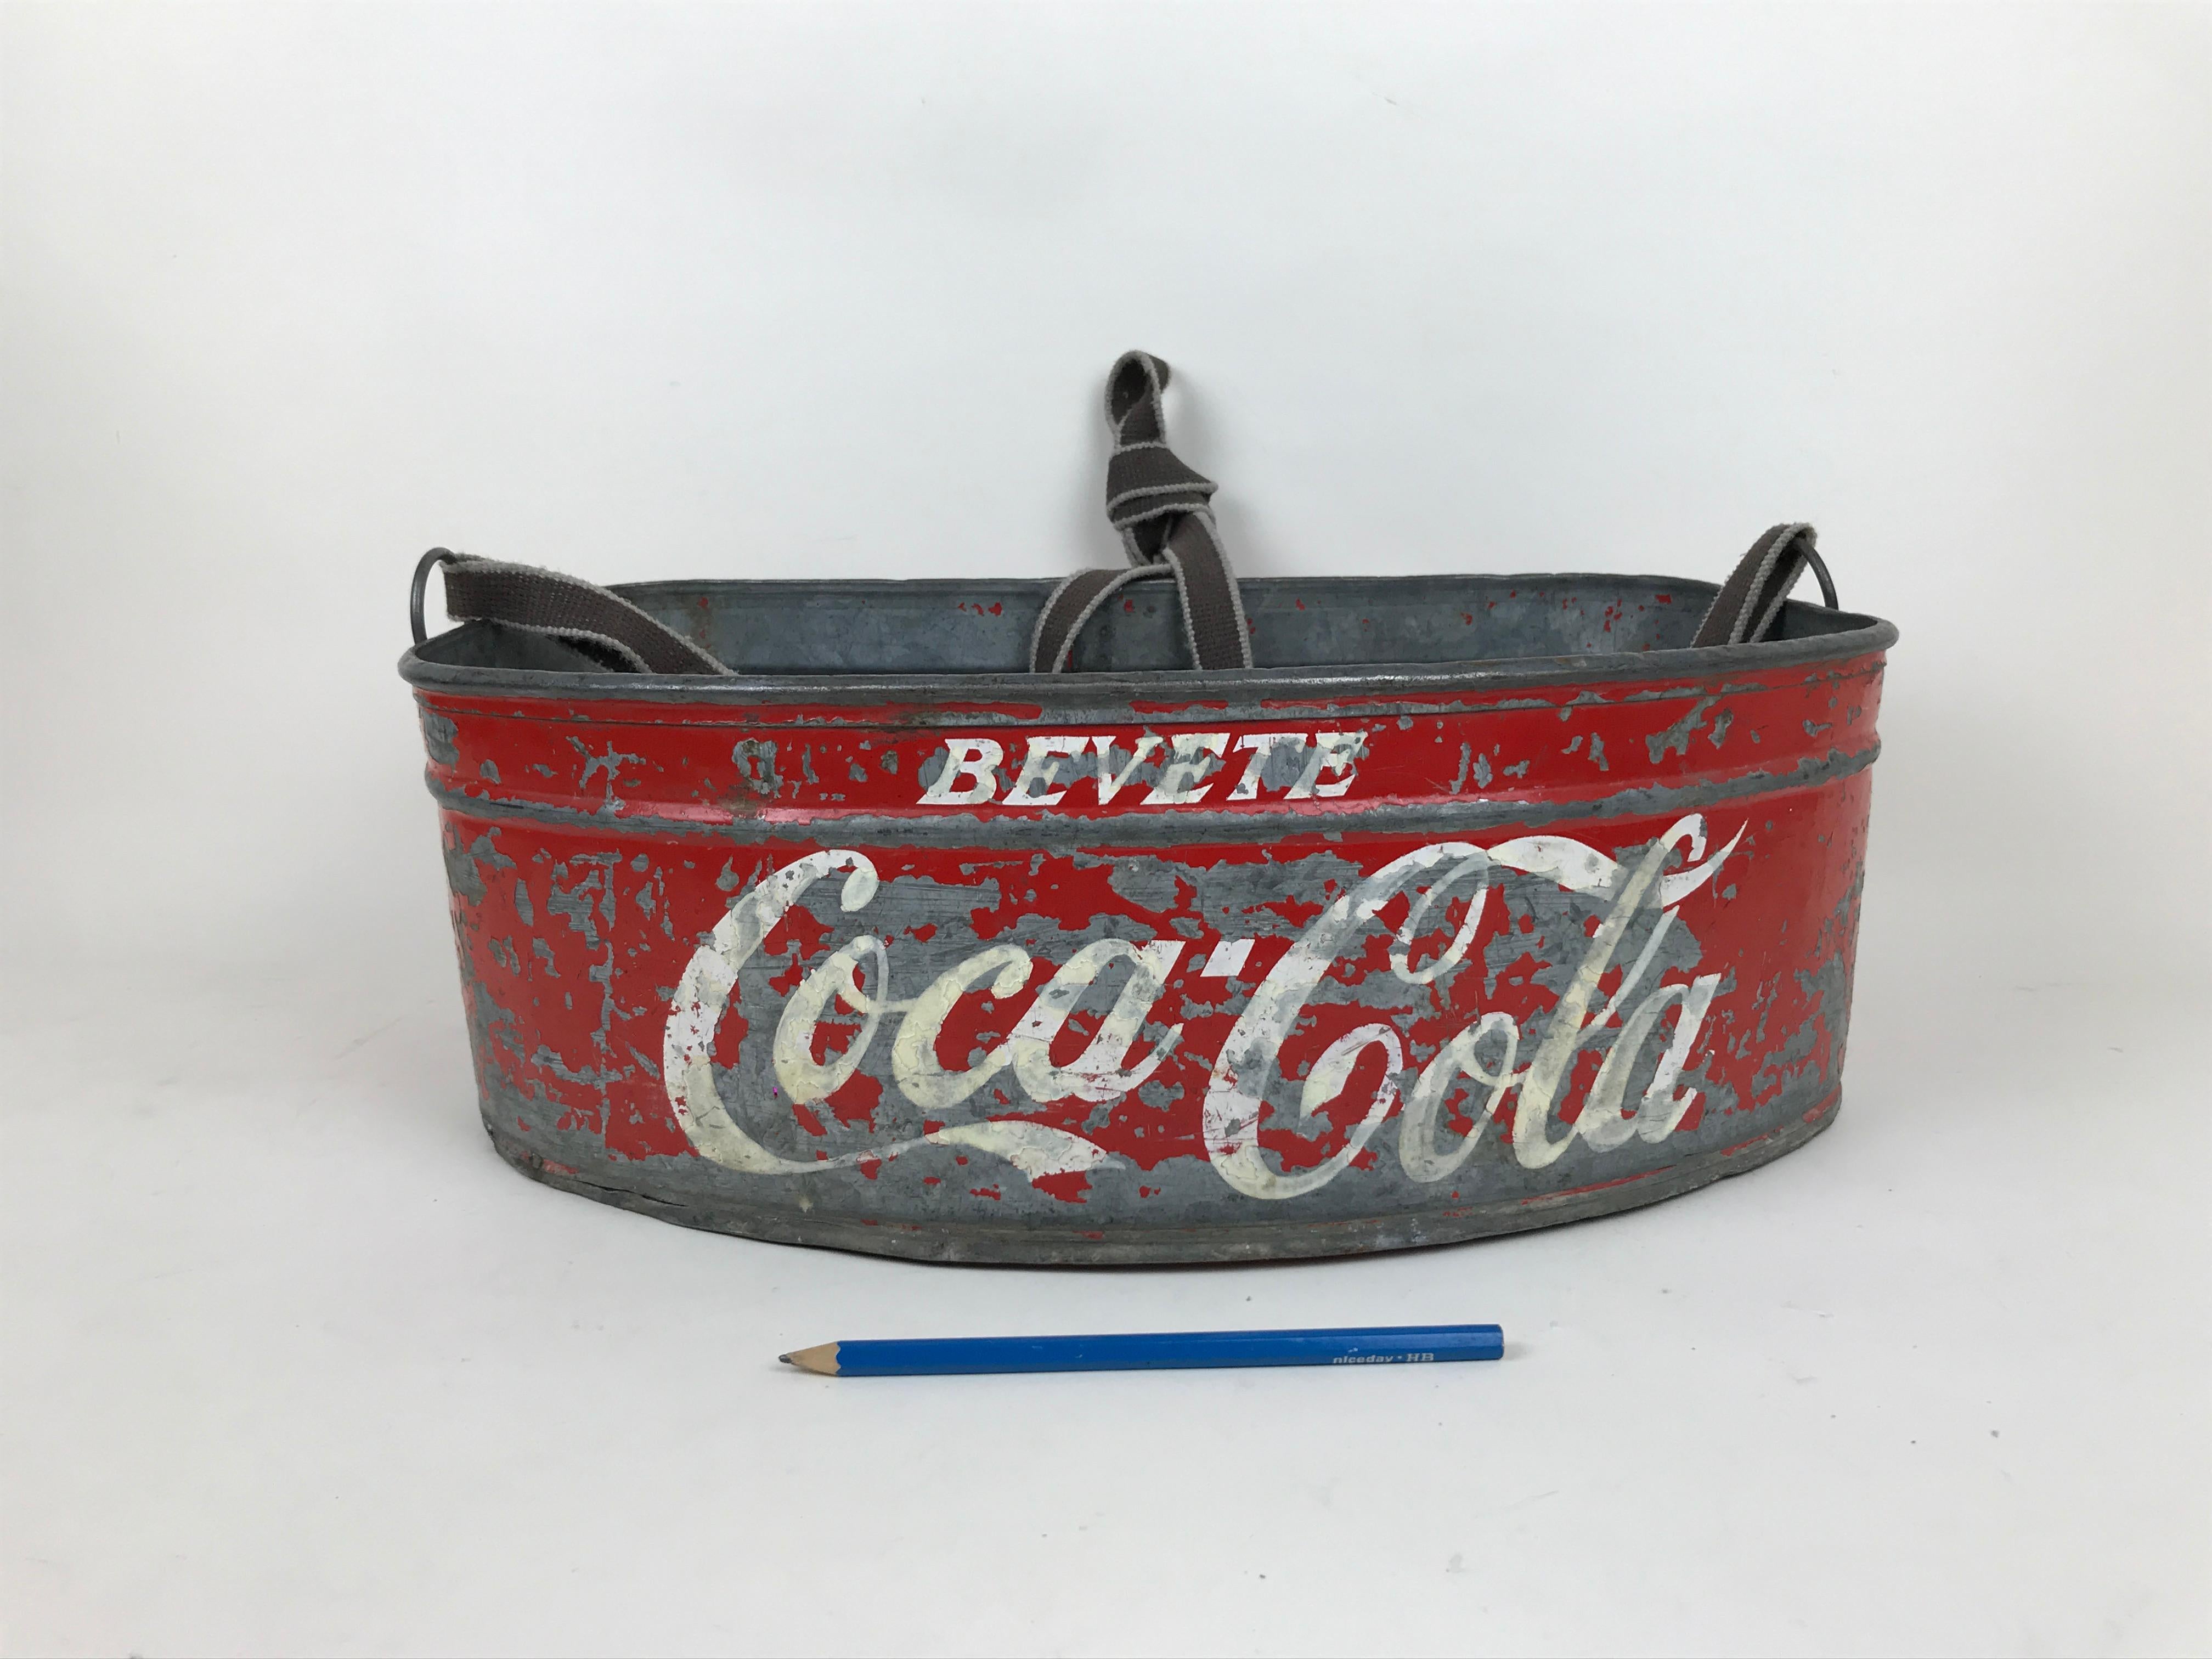 This vintage metal Coca-Cola vending tray, in red and white, was used in the 1960s in Italy to sell Coca-Cola's sodas during sport events at stadiums. 

The front of the cooler shows the company motto 